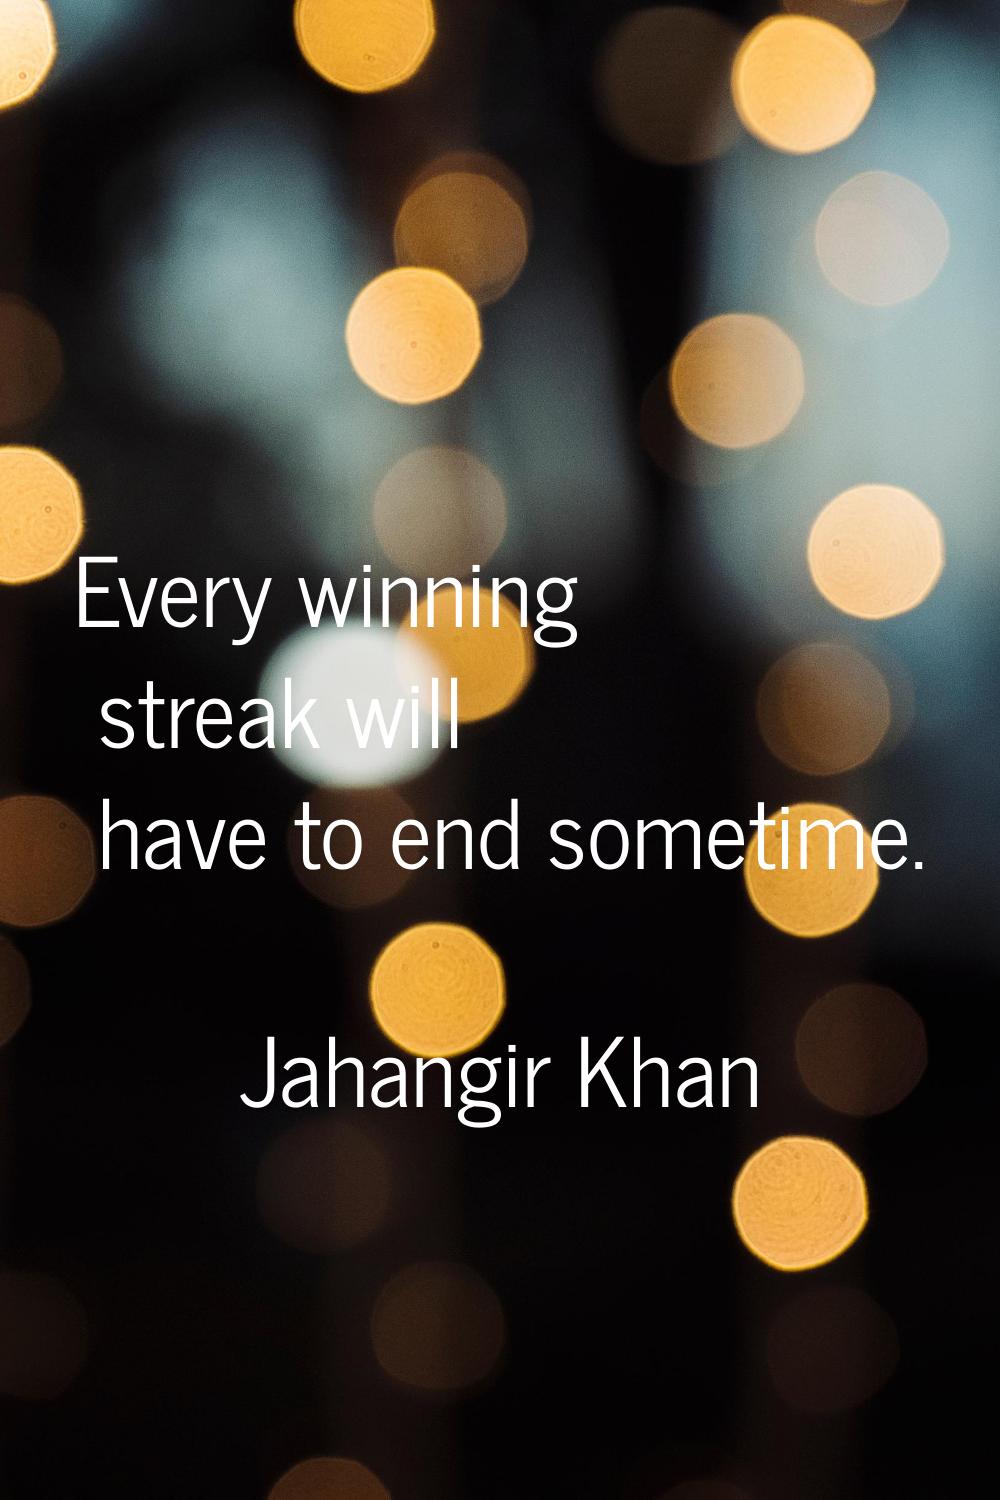 Every winning streak will have to end sometime.